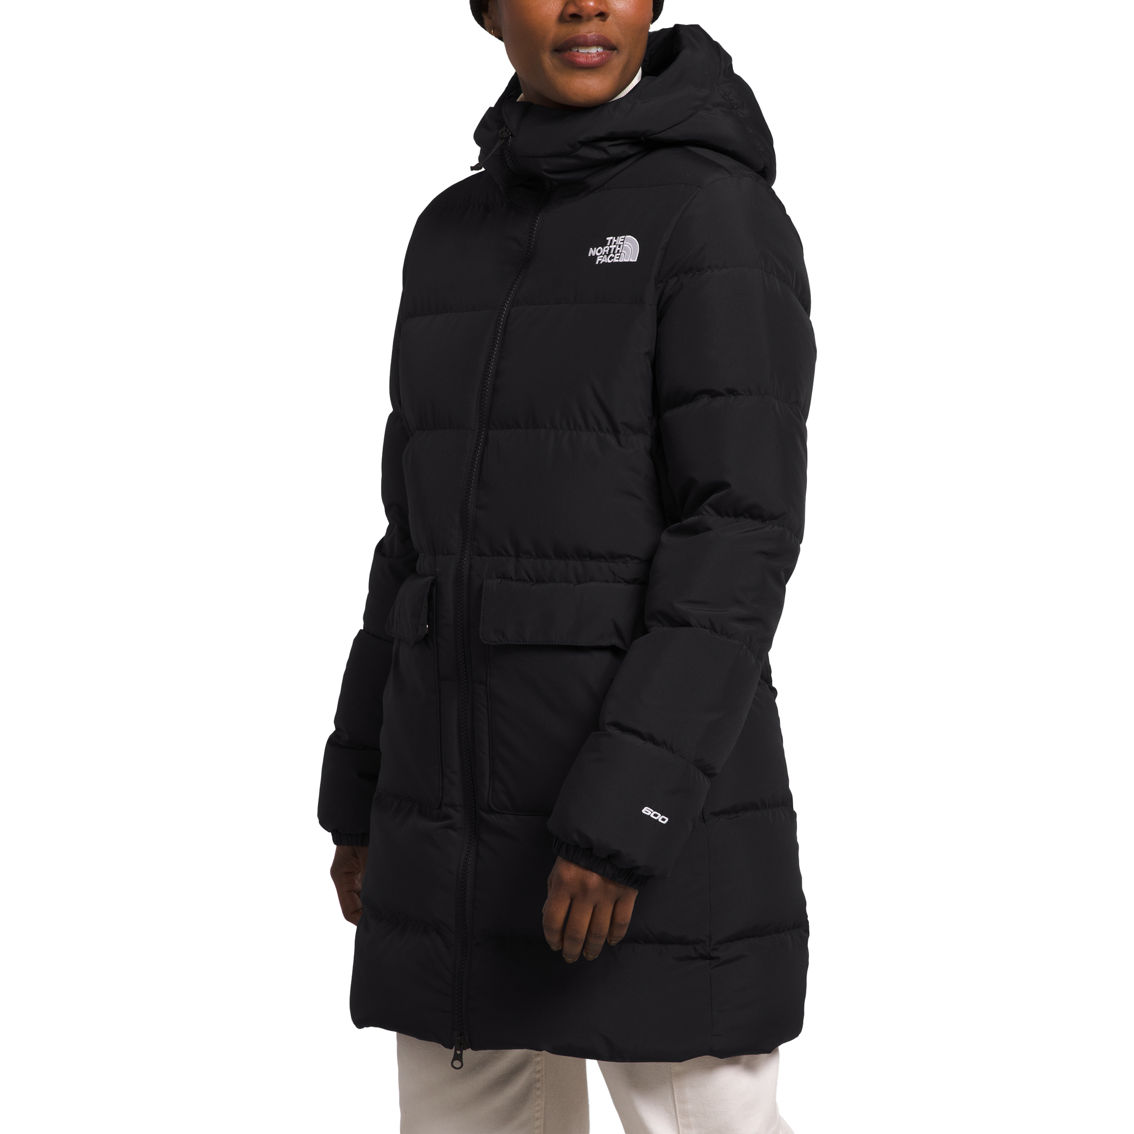 The North Face Gotham Parka Jacket | Jackets | Clothing & Accessories ...